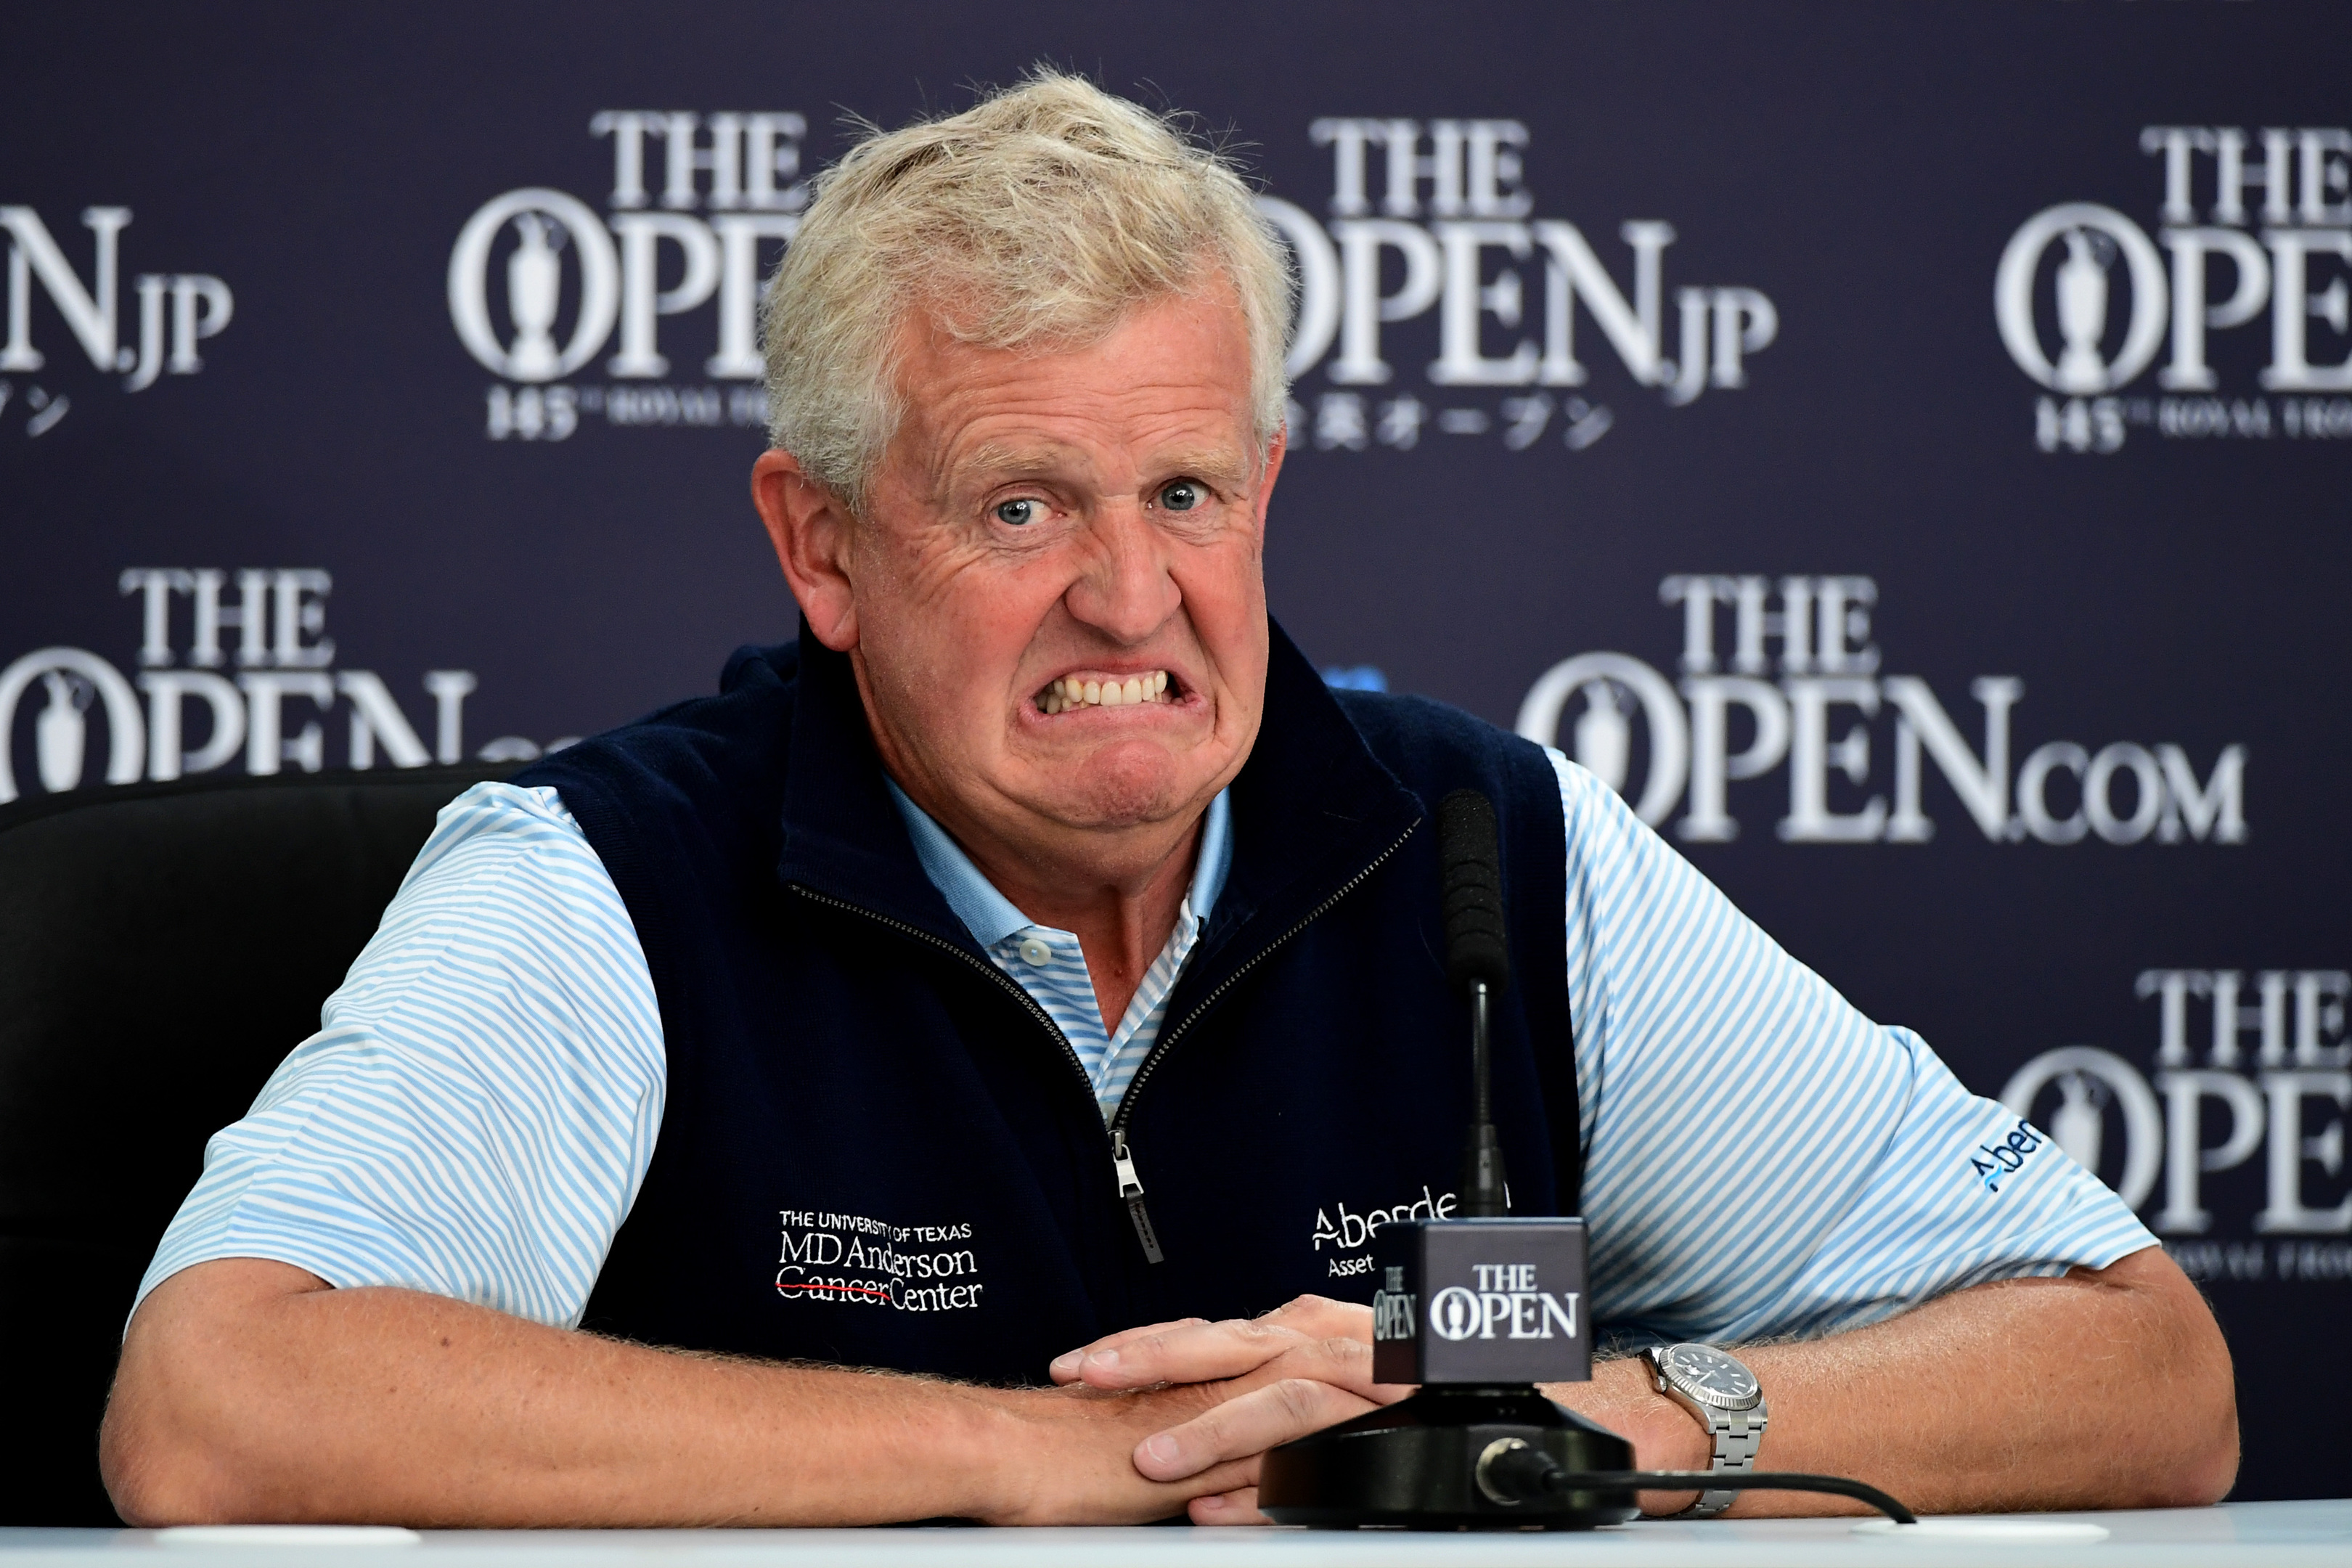 Colin Montgomerie: actually honoured to be hitting the first tee shot of the Open at Royal Troon.